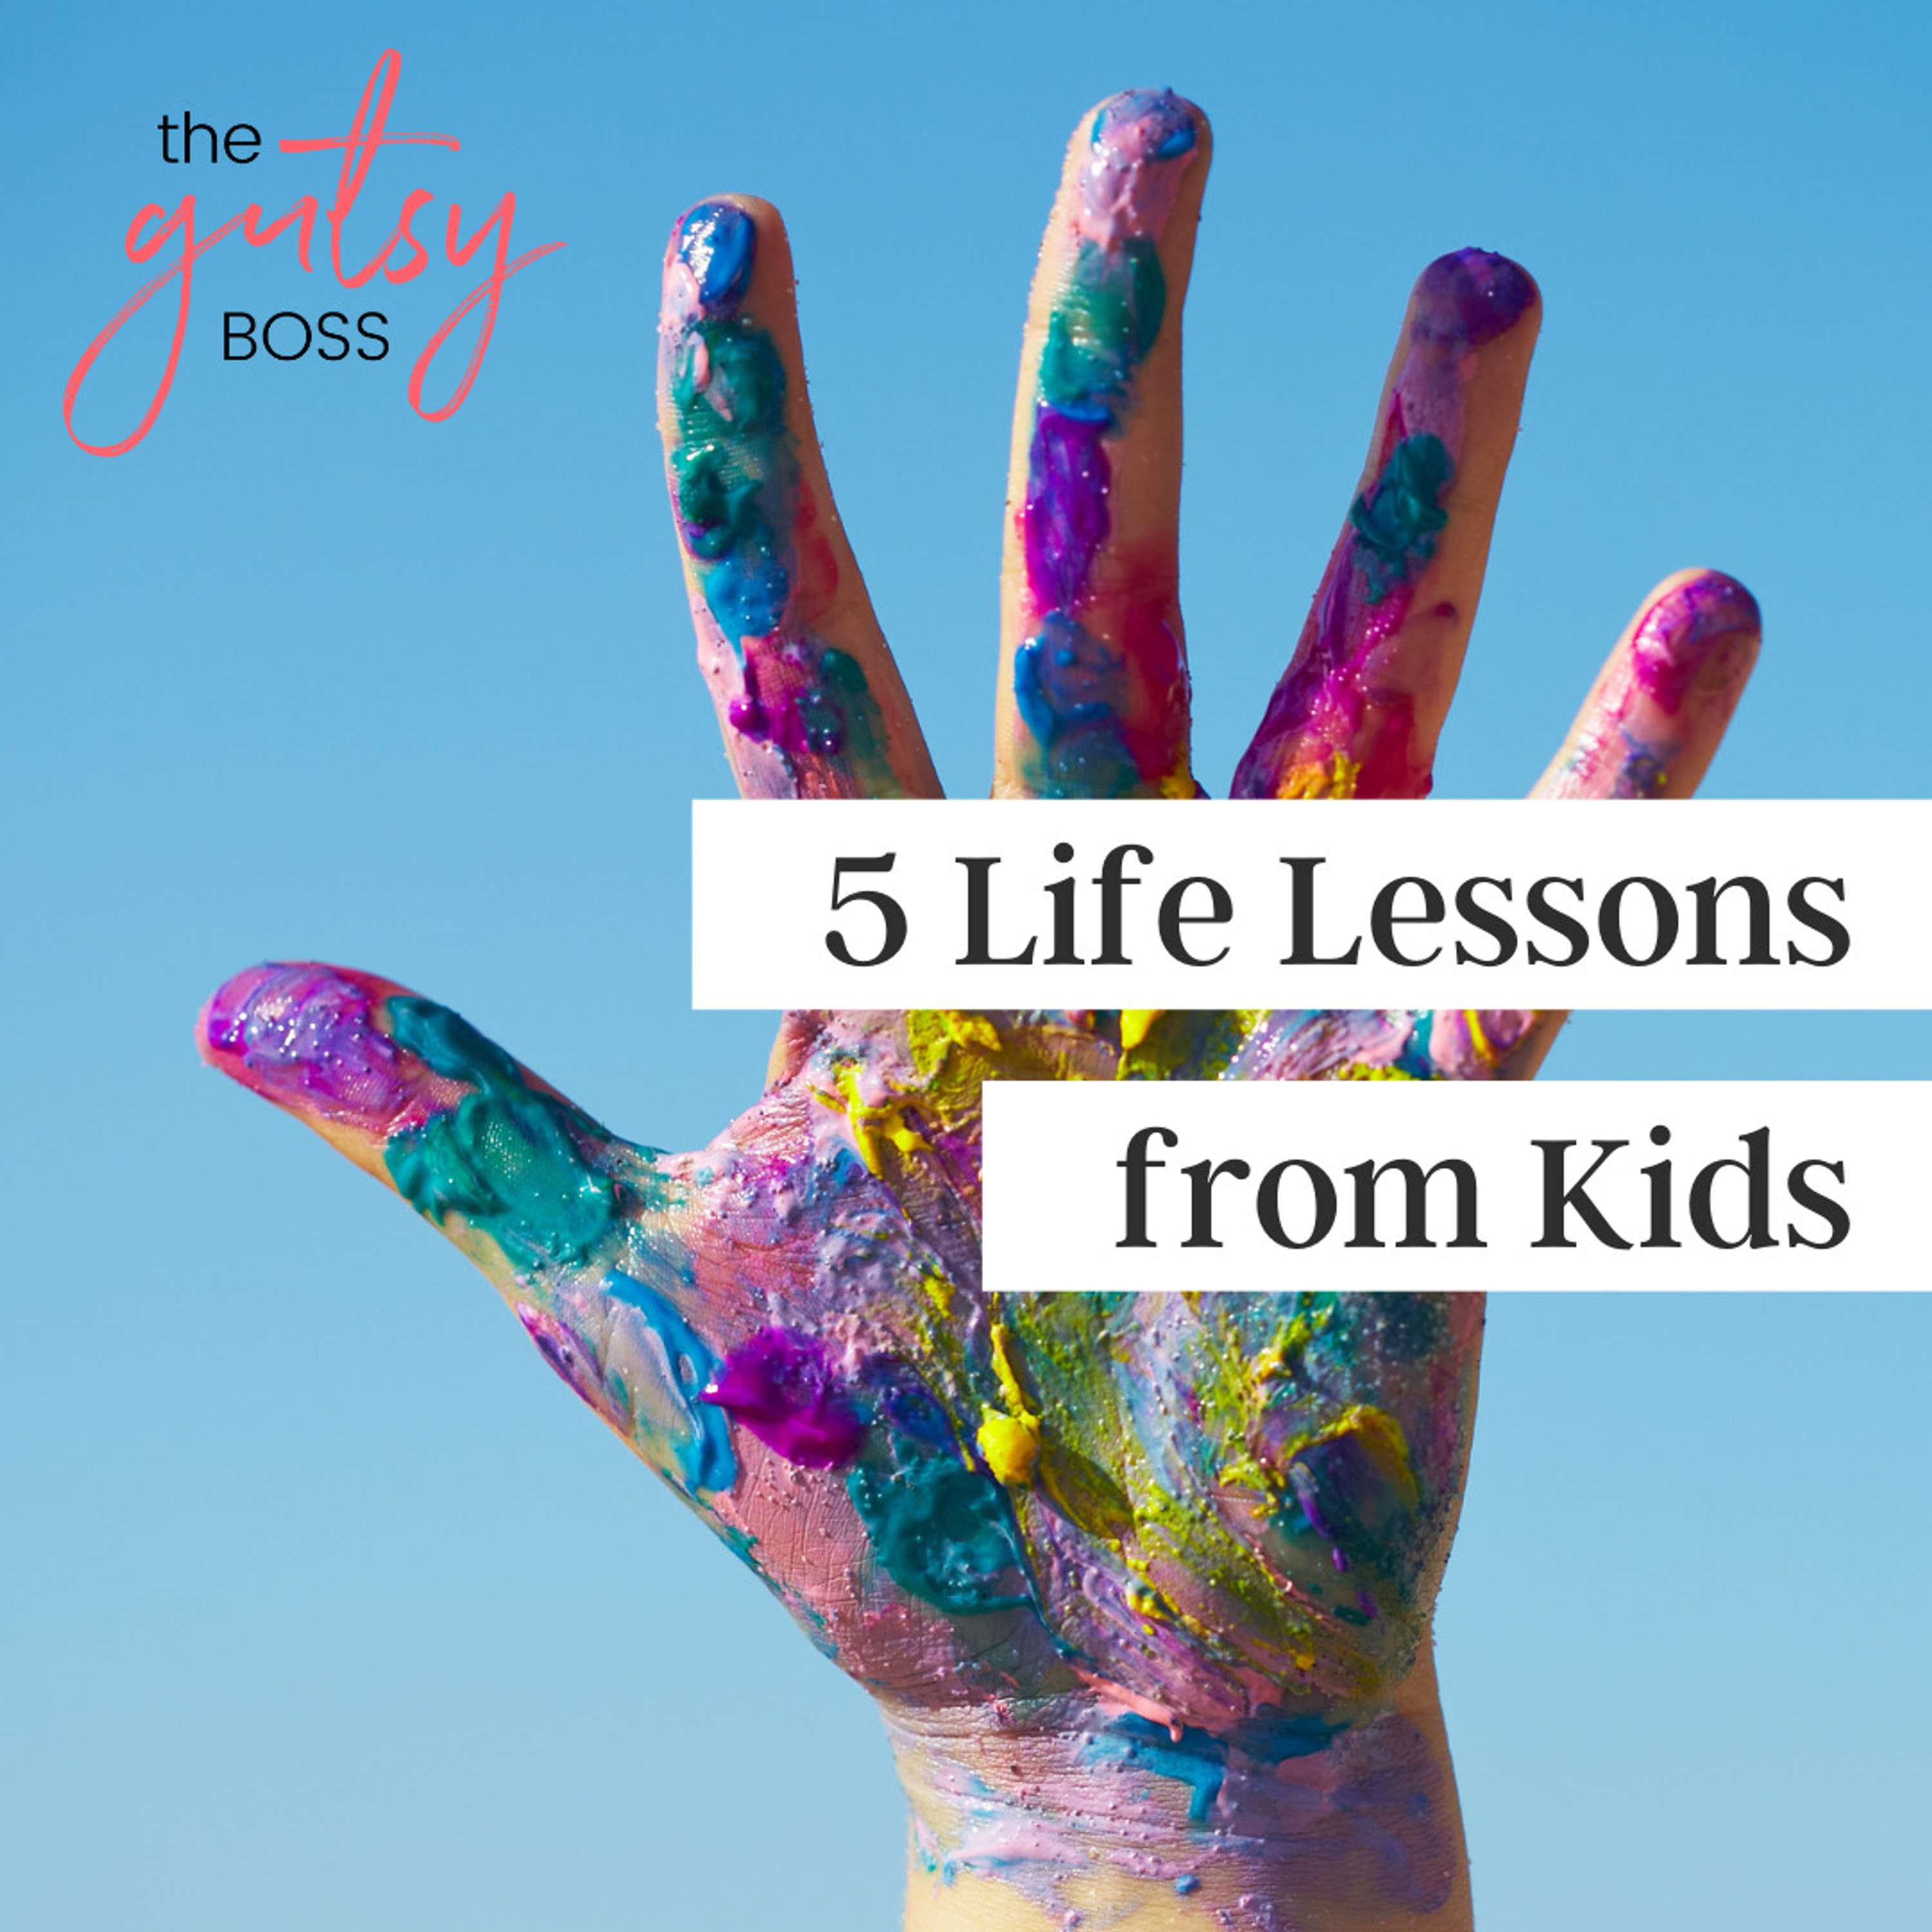 25. 5 Mindset Lessons from Kids